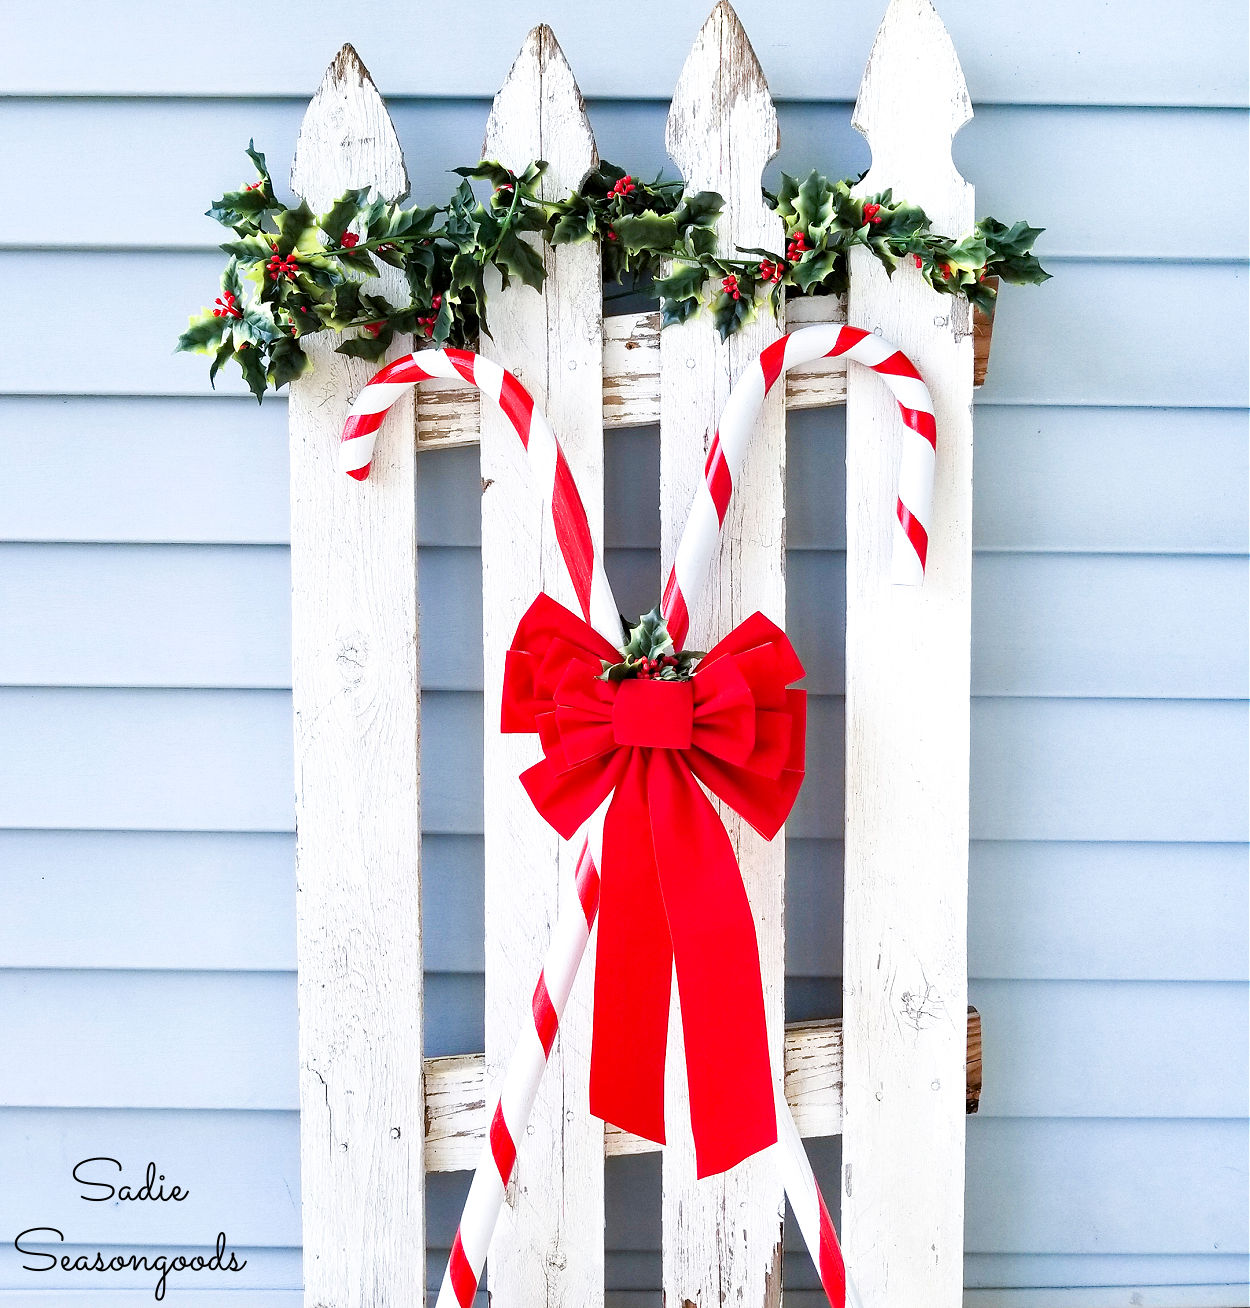 DIY Candy Cane Decorations from Wooden Walking Canes